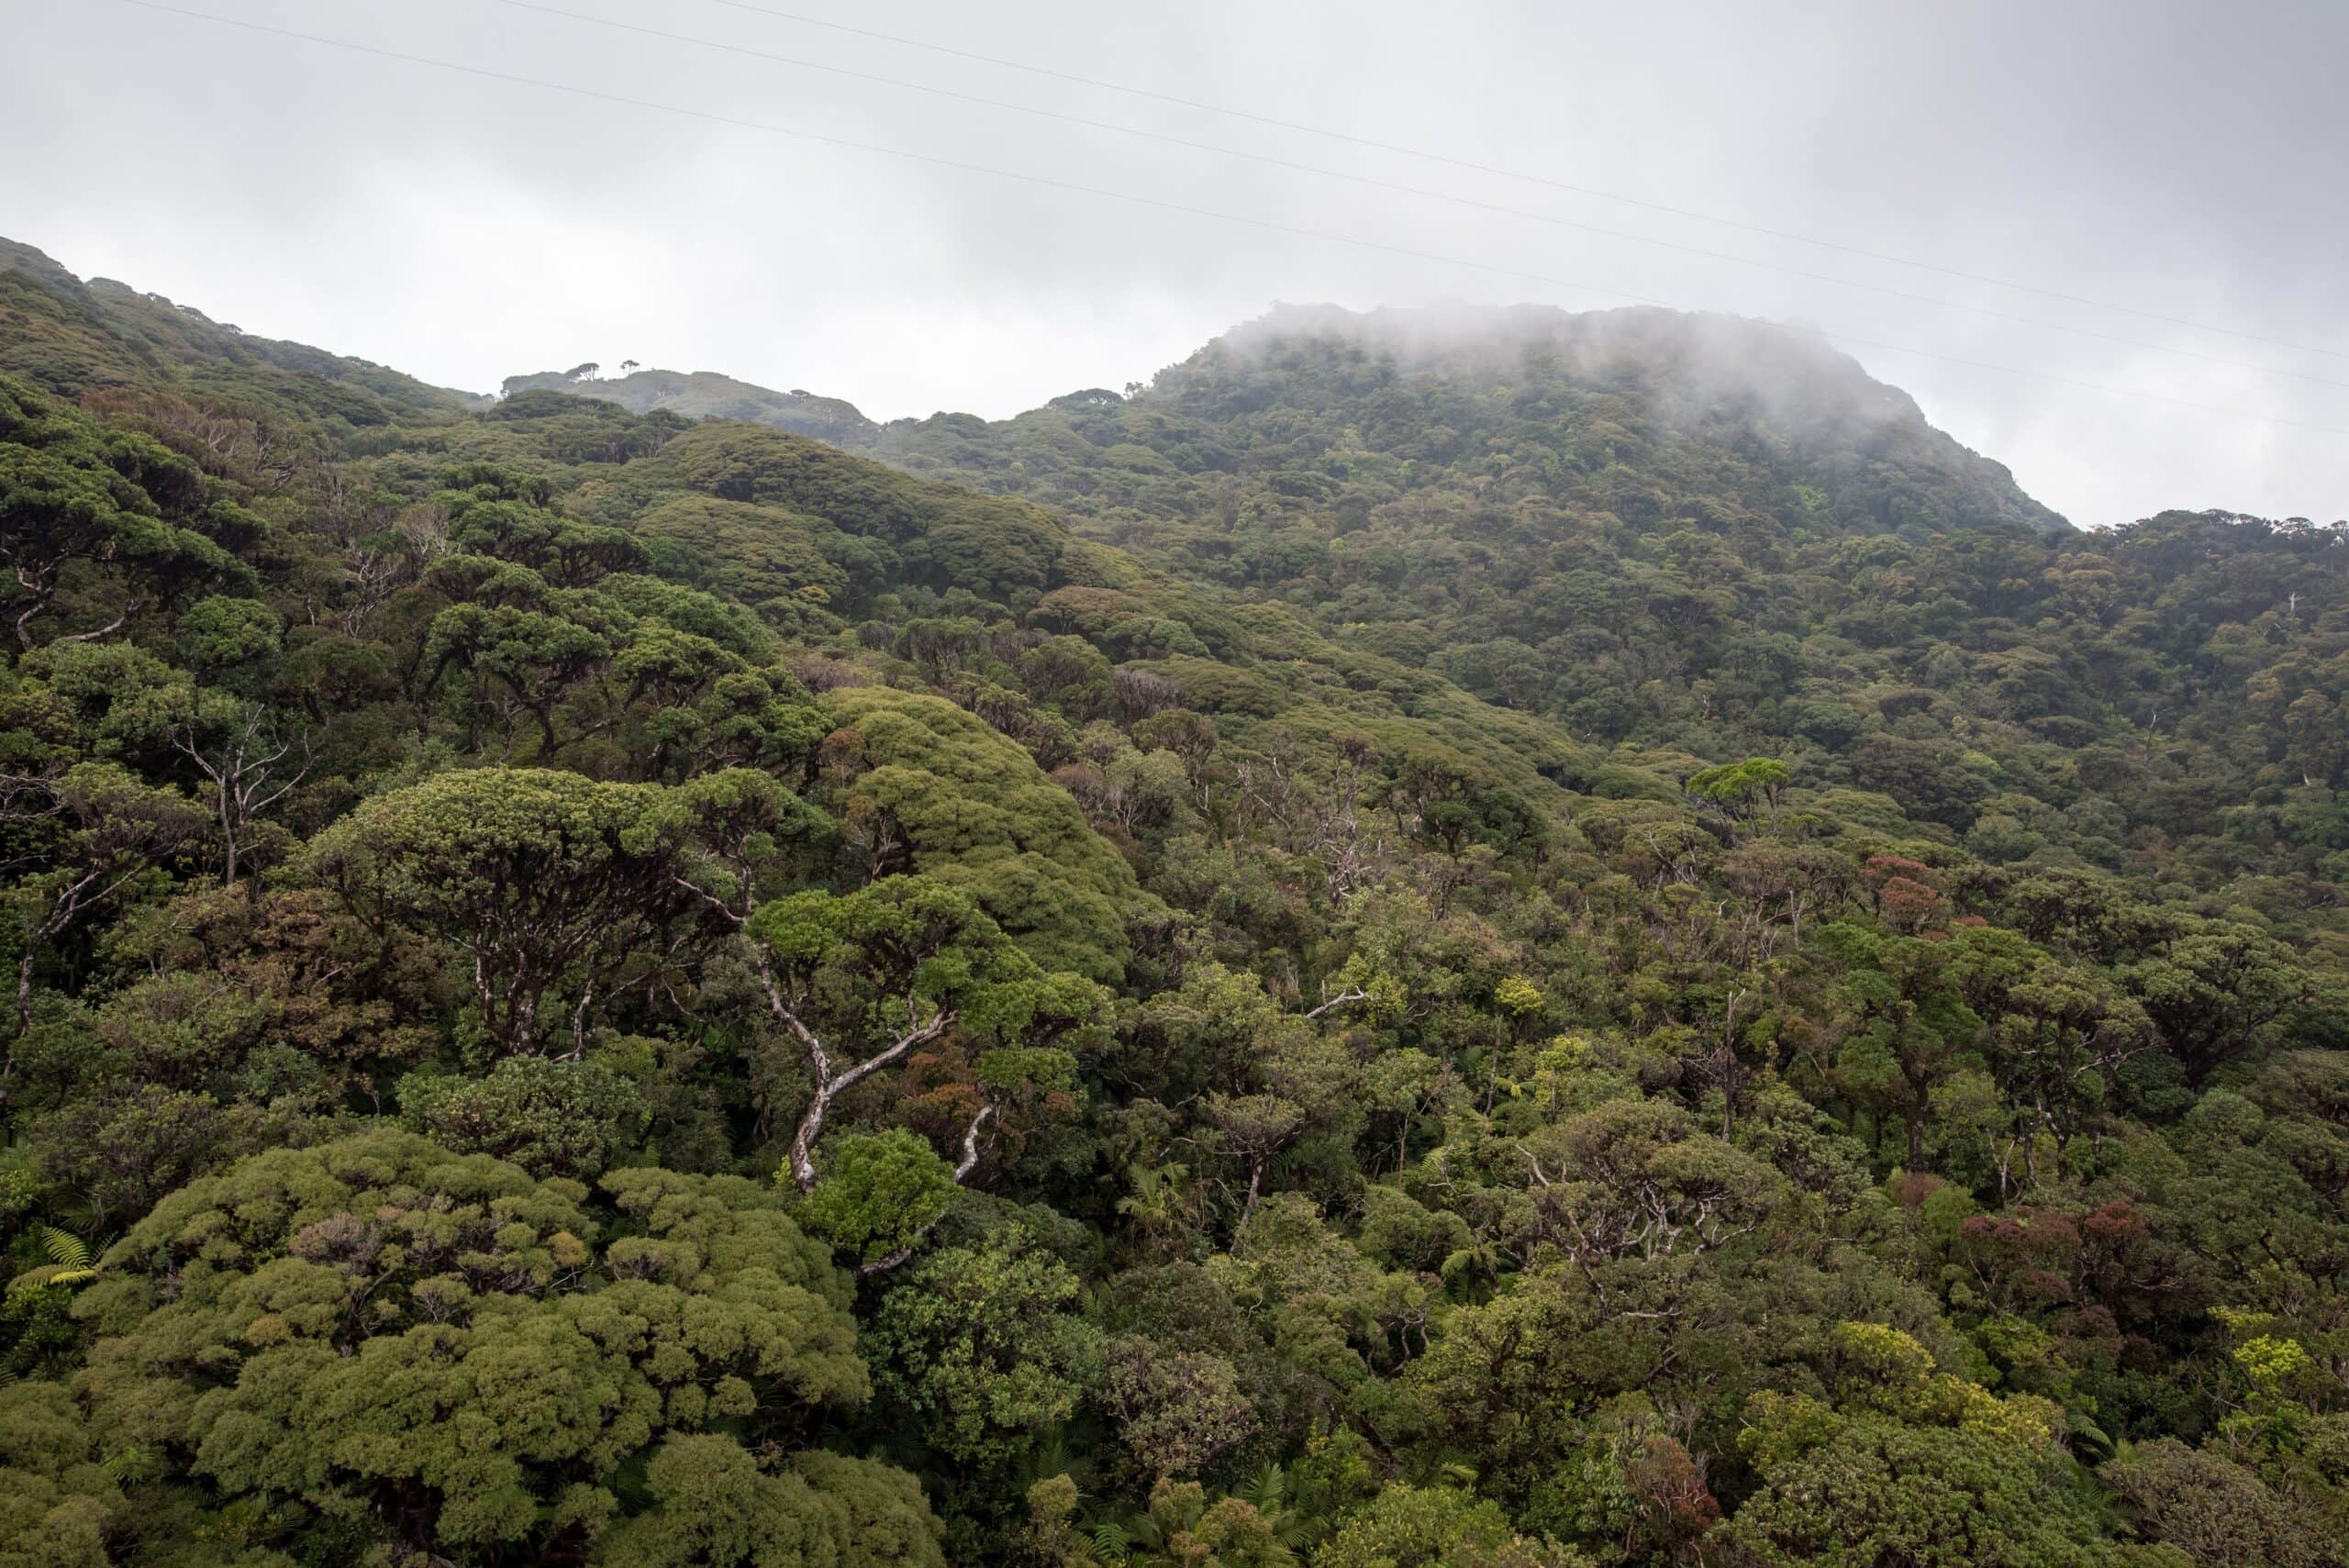 Photo of Far-North Queensland Forest | Featured Image for Climate, Forests and Nature Page by TERN.